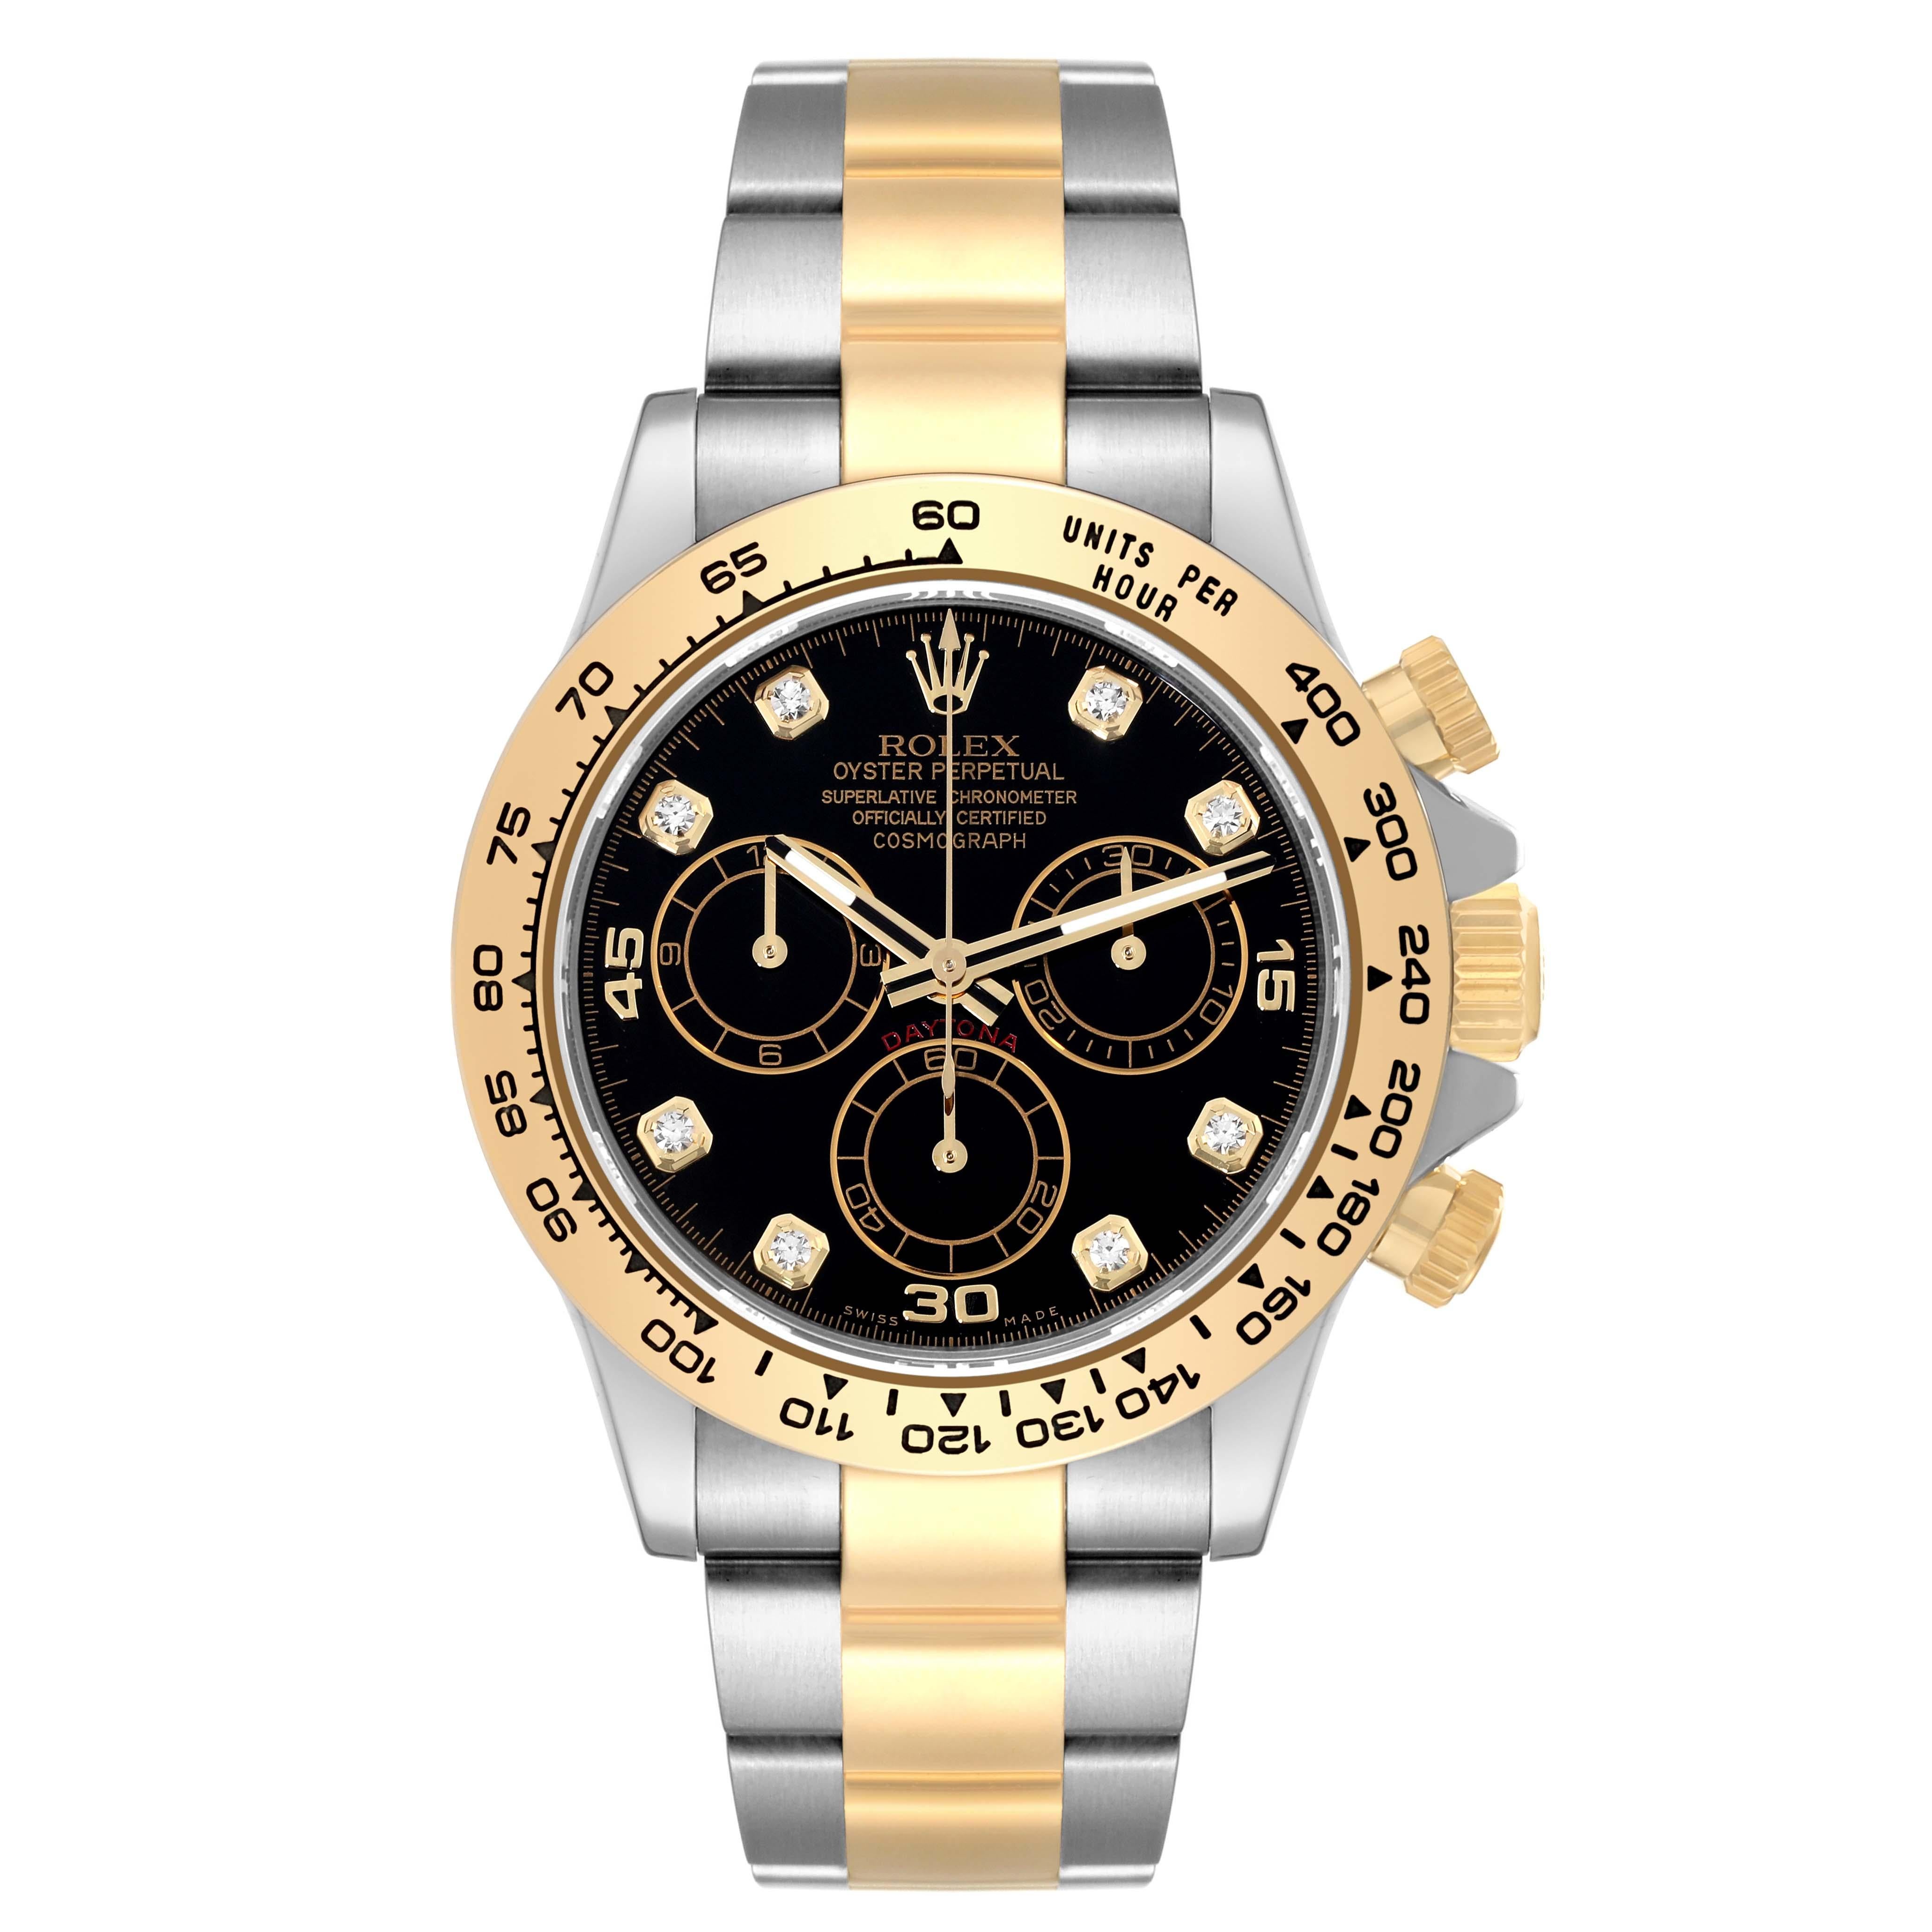 Rolex Cosmograph Daytona Steel Yellow Gold Diamond Mens Watch 116503 Box Card. Officially certified chronometer self-winding movement. Rhodium-plated, oeil-de-perdrix decoration, straight line lever escapement, monometallic balance adjusted to 5